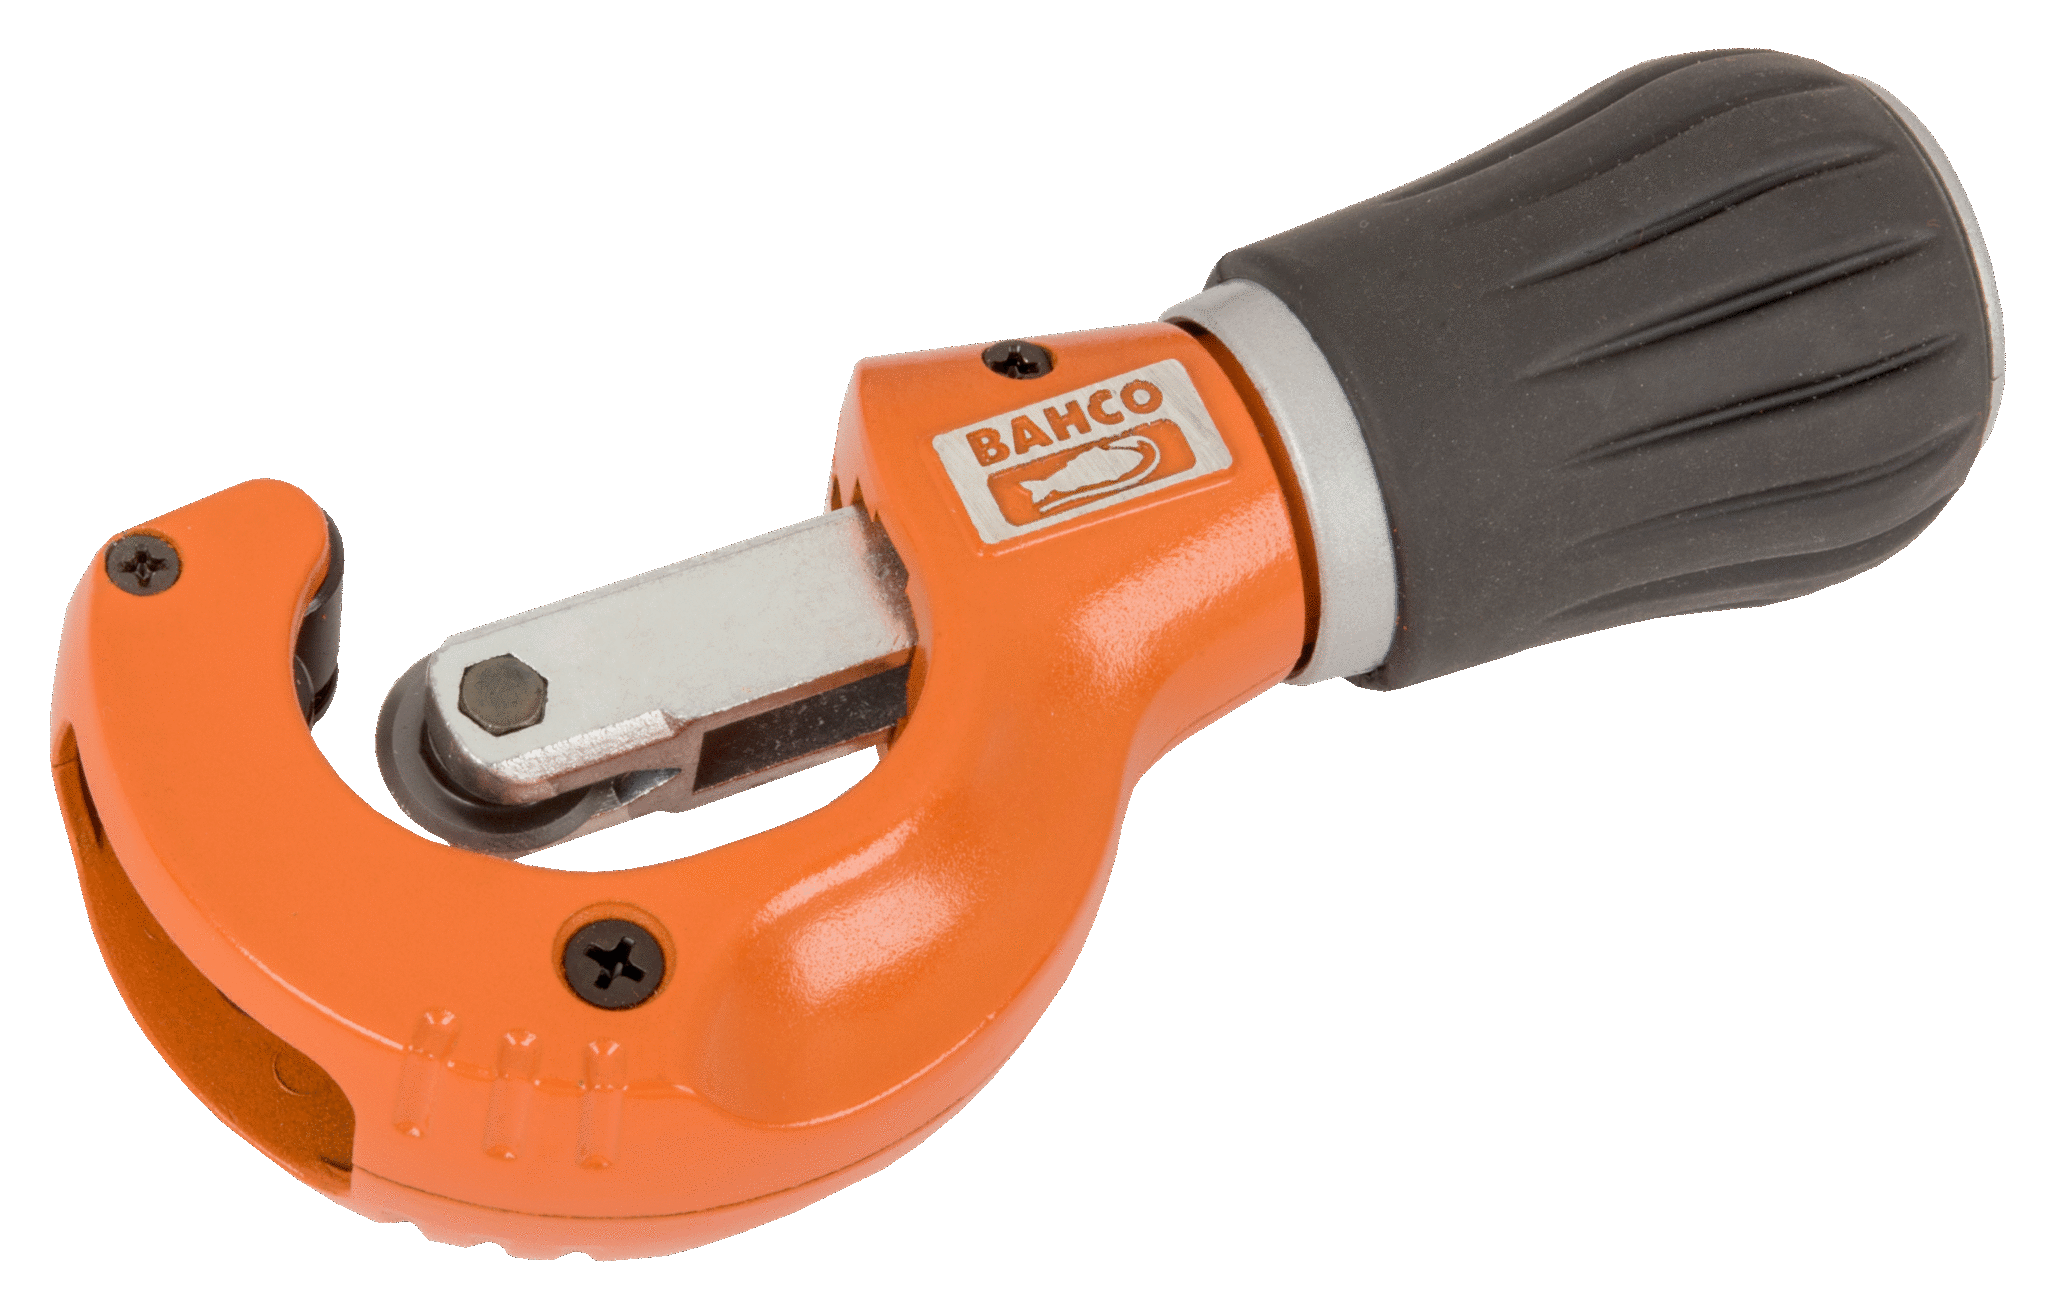 BAHCO 302-35 Tubo Cutter 8-35mm 